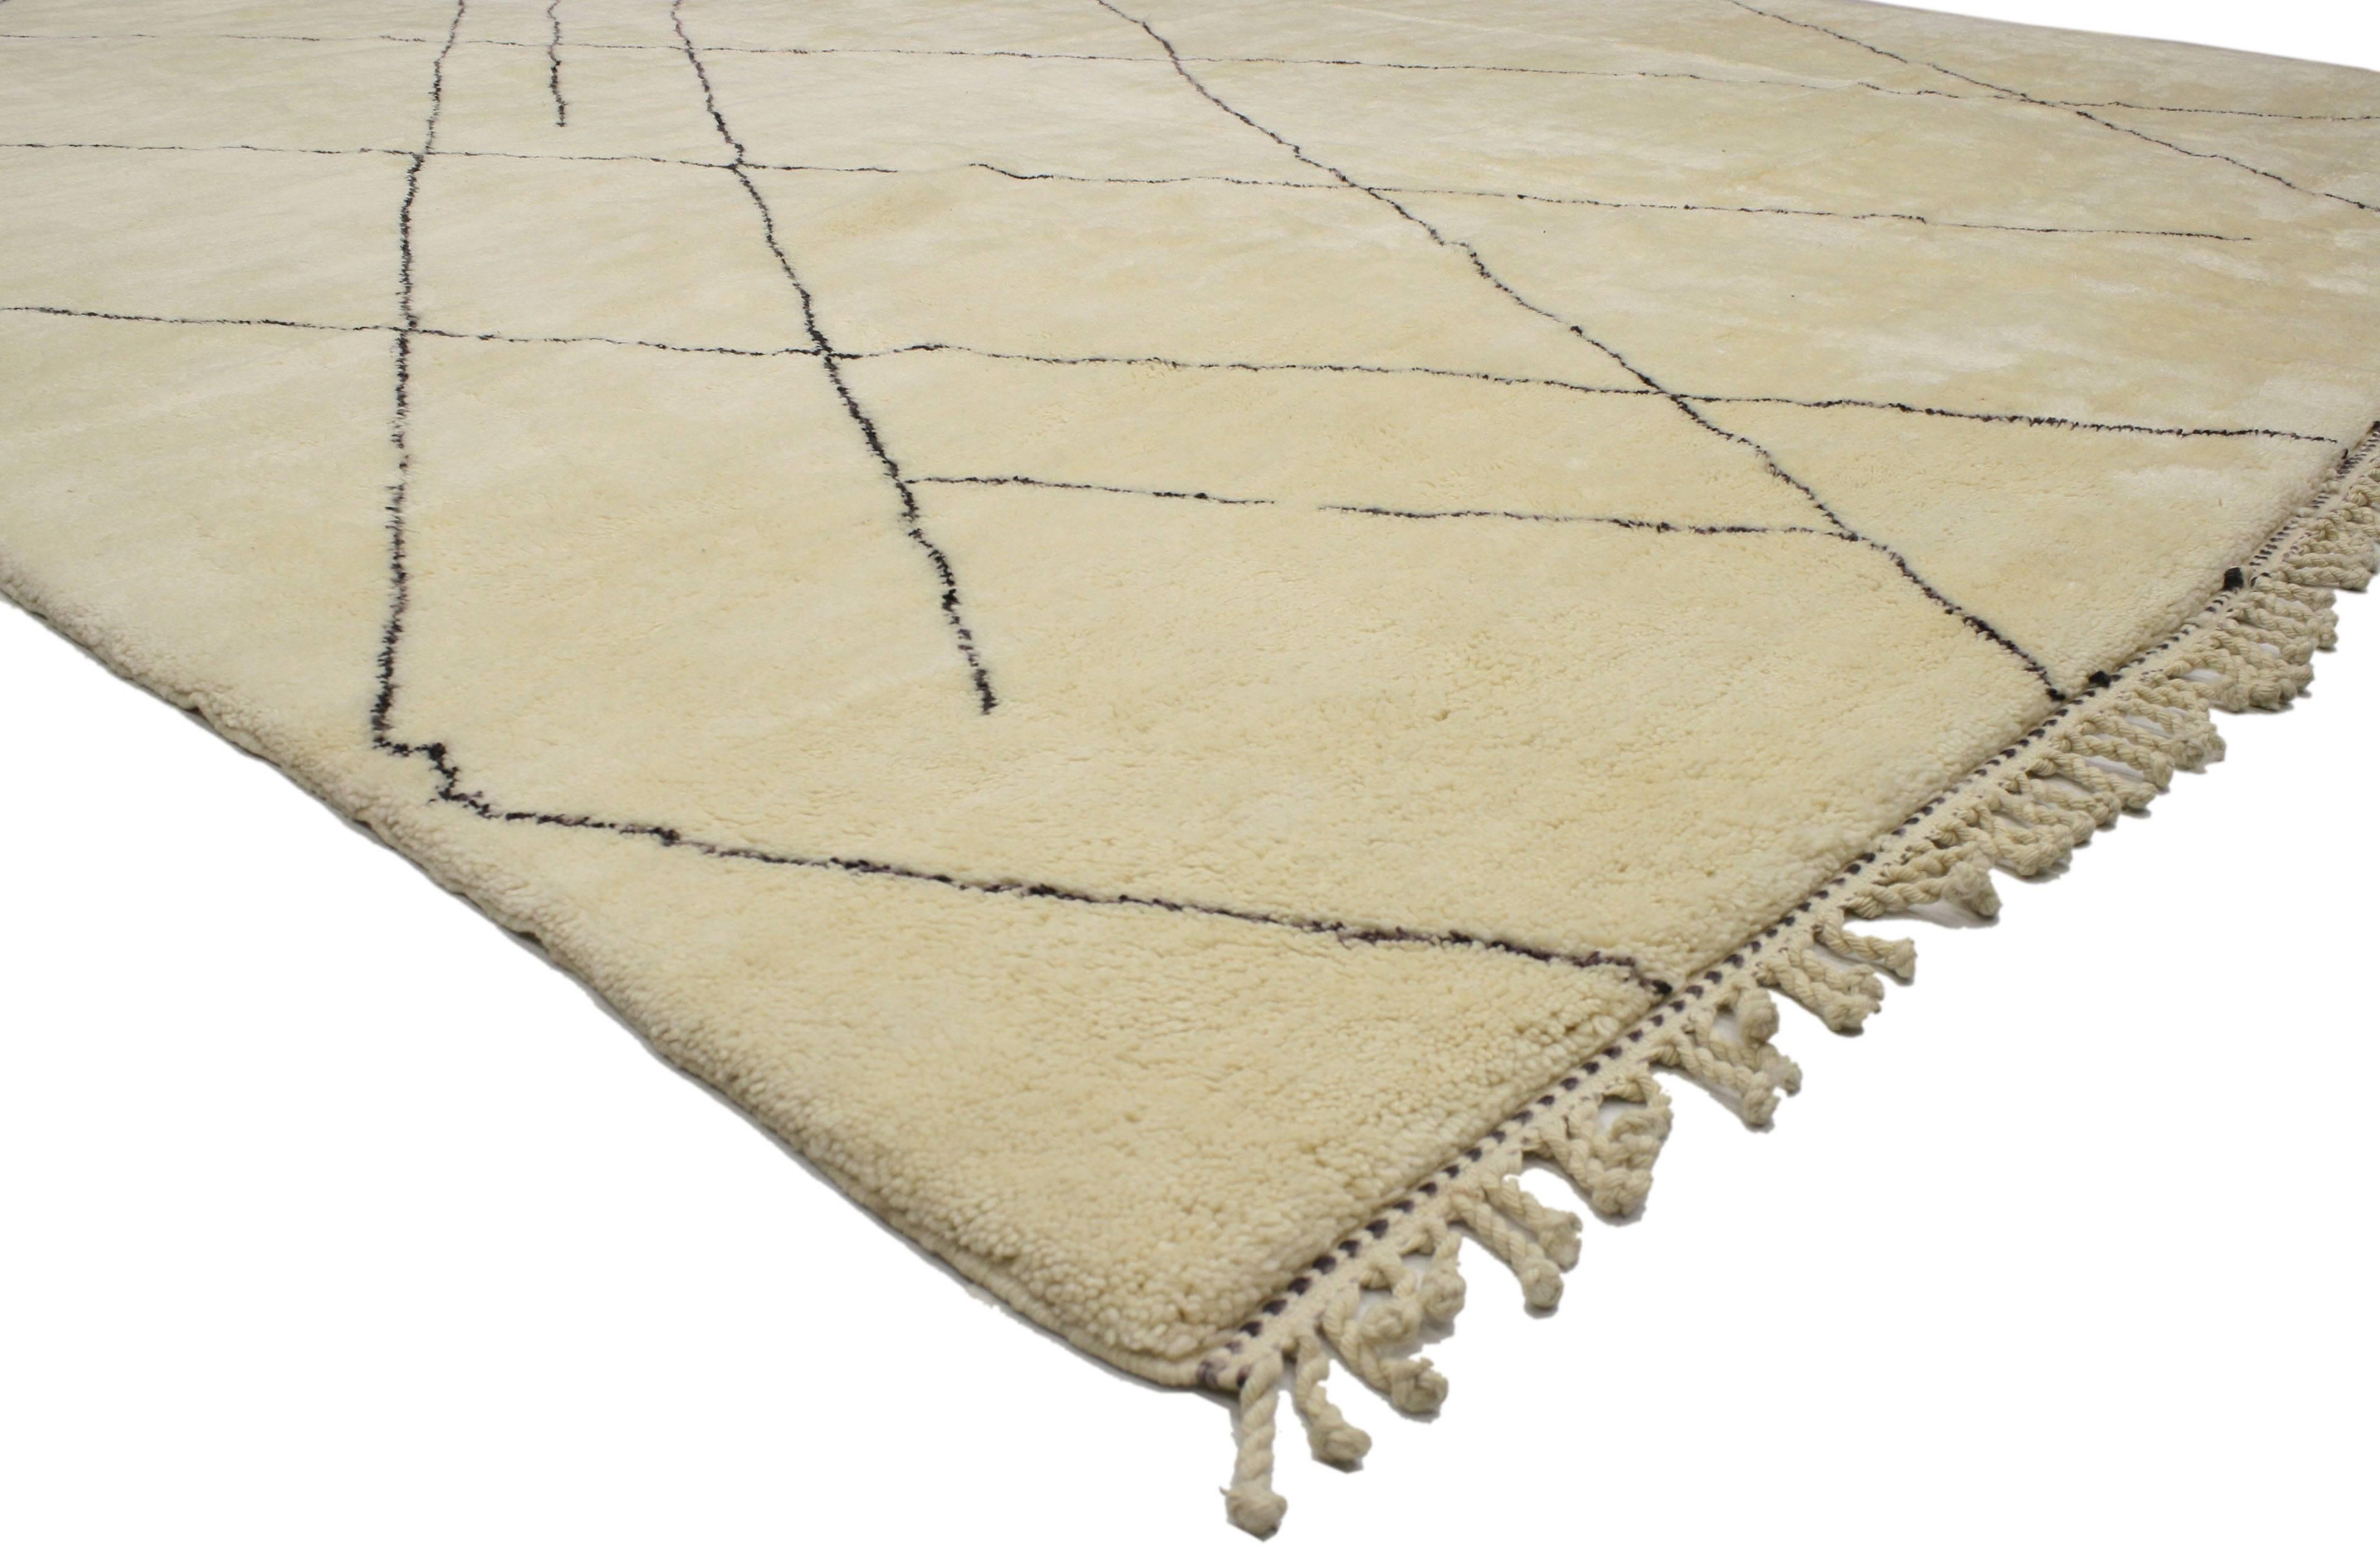 20530 contemporary Moroccan rug with modern style. This contemporary Moroccan rug with Modern style combines the nomadic Berber tribe history with today’s modern interiors. Impeccably woven from hand-knotted sheep wool, this high pile Moroccan rug